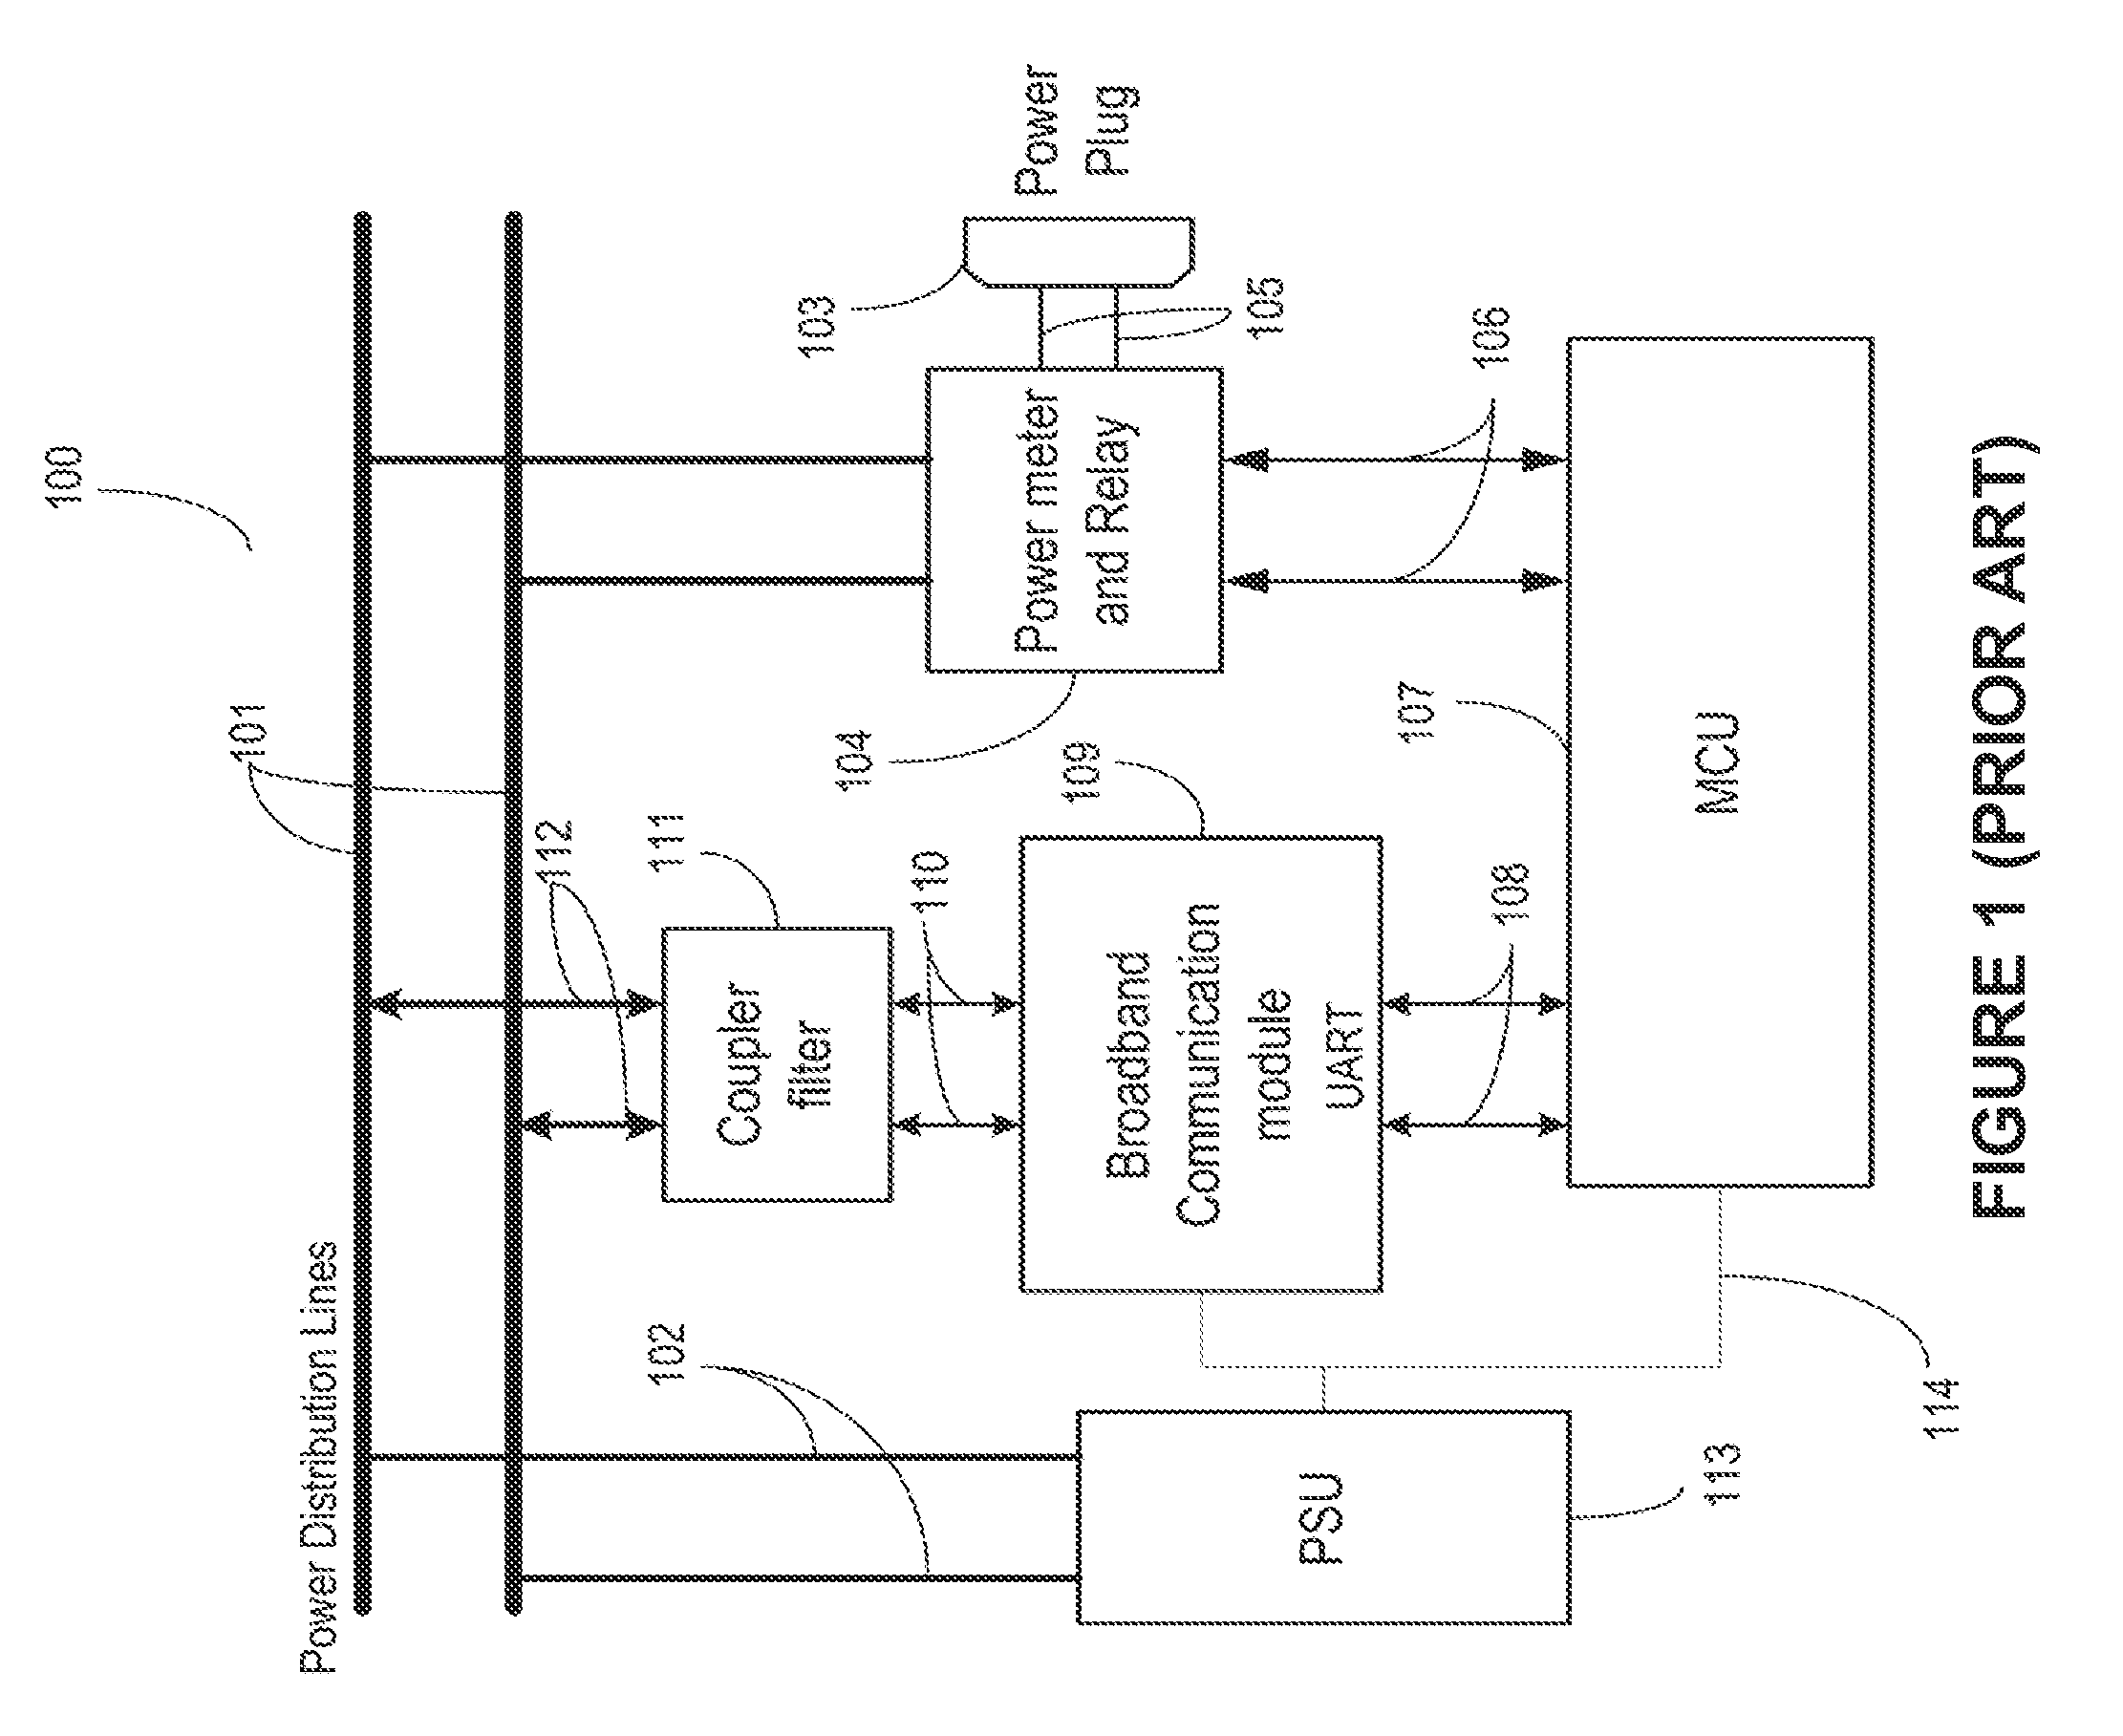 Sensor having an integrated Zigbee® device for communication with Zigbee® enabled appliances to control and monitor Zigbee® enabled appliances